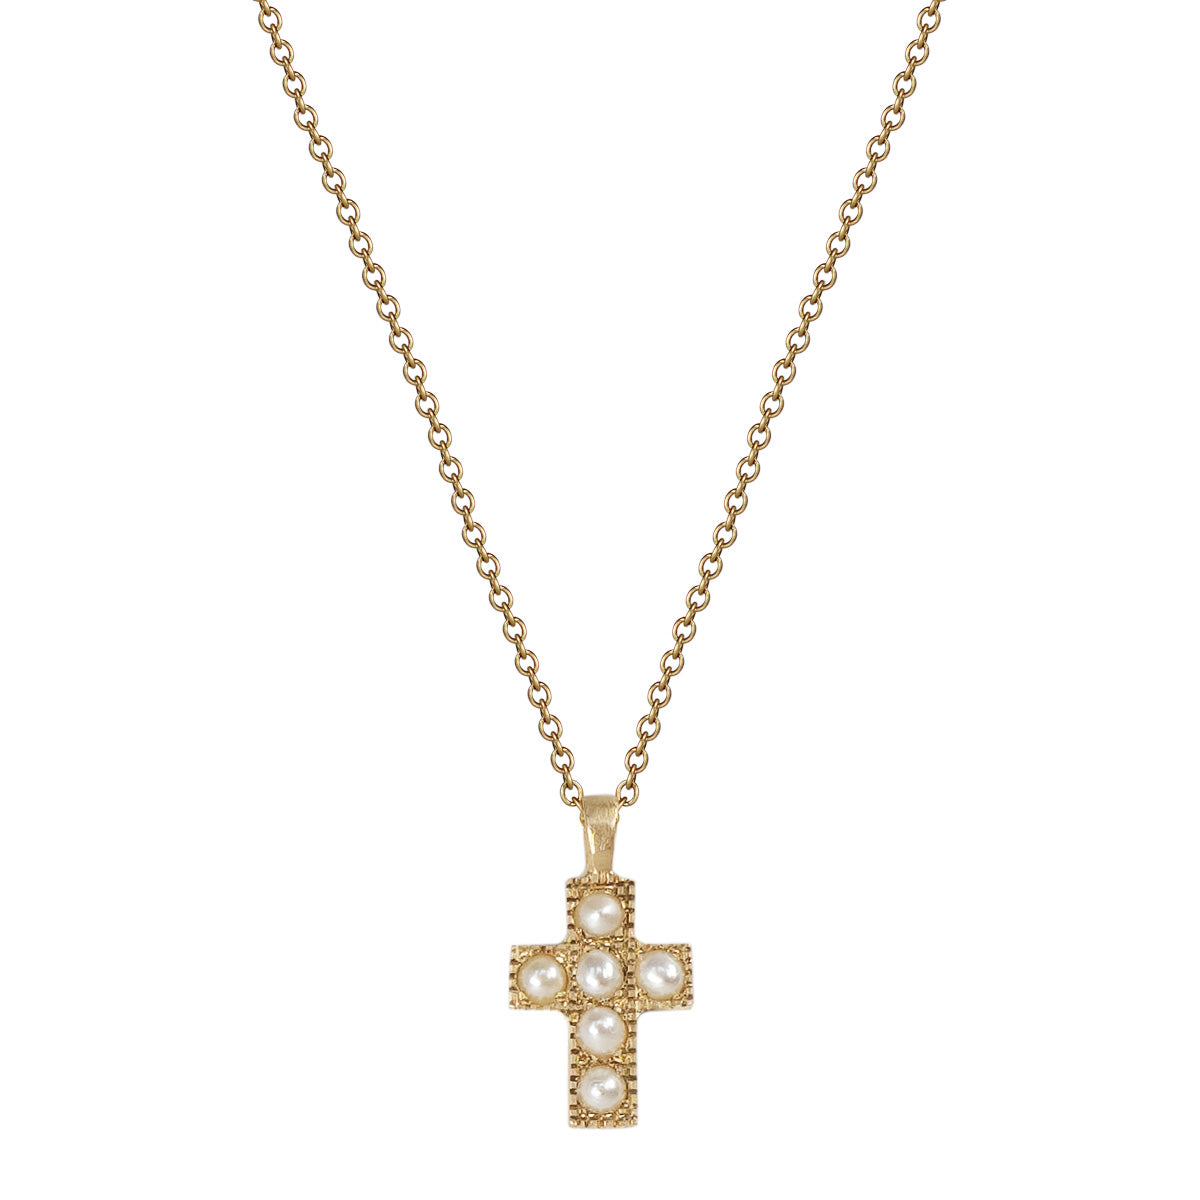 10K Gold Cross Pendant with Pearls